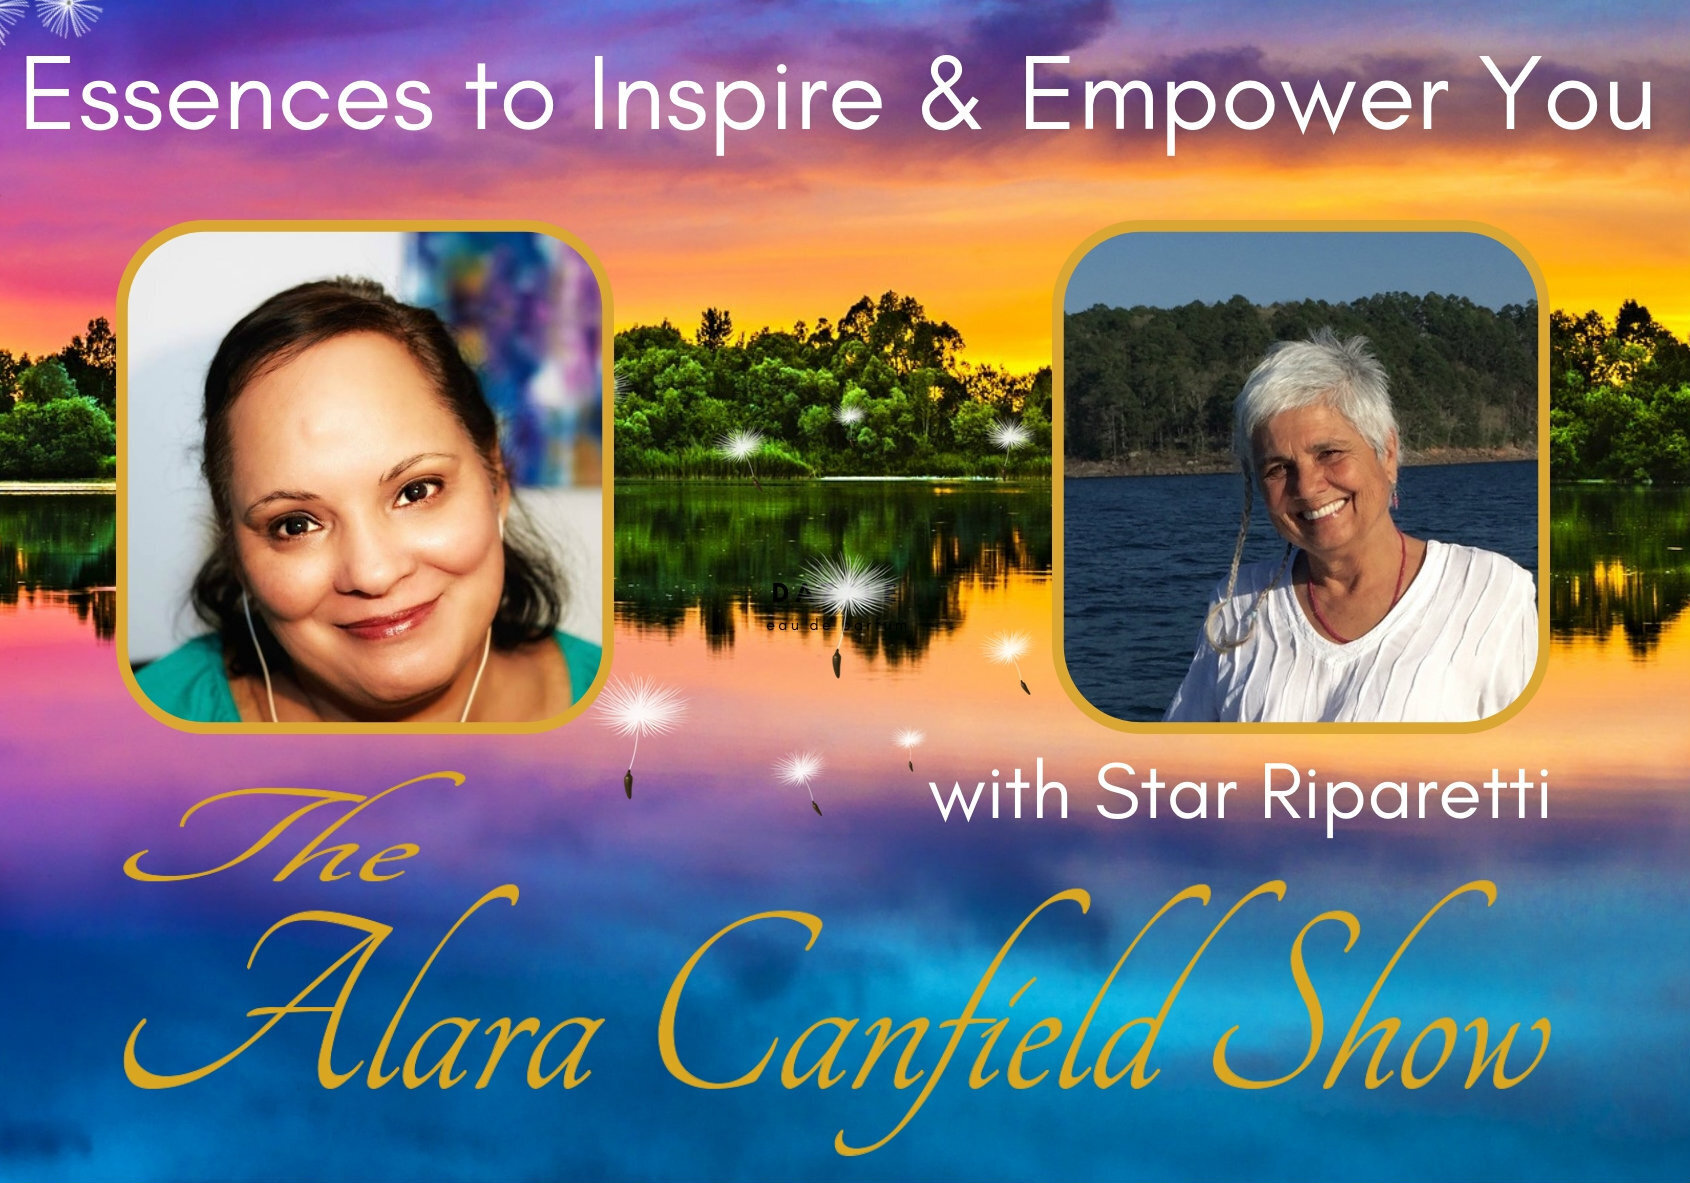 Essences to Inspire & Empower You with Star Riparetti